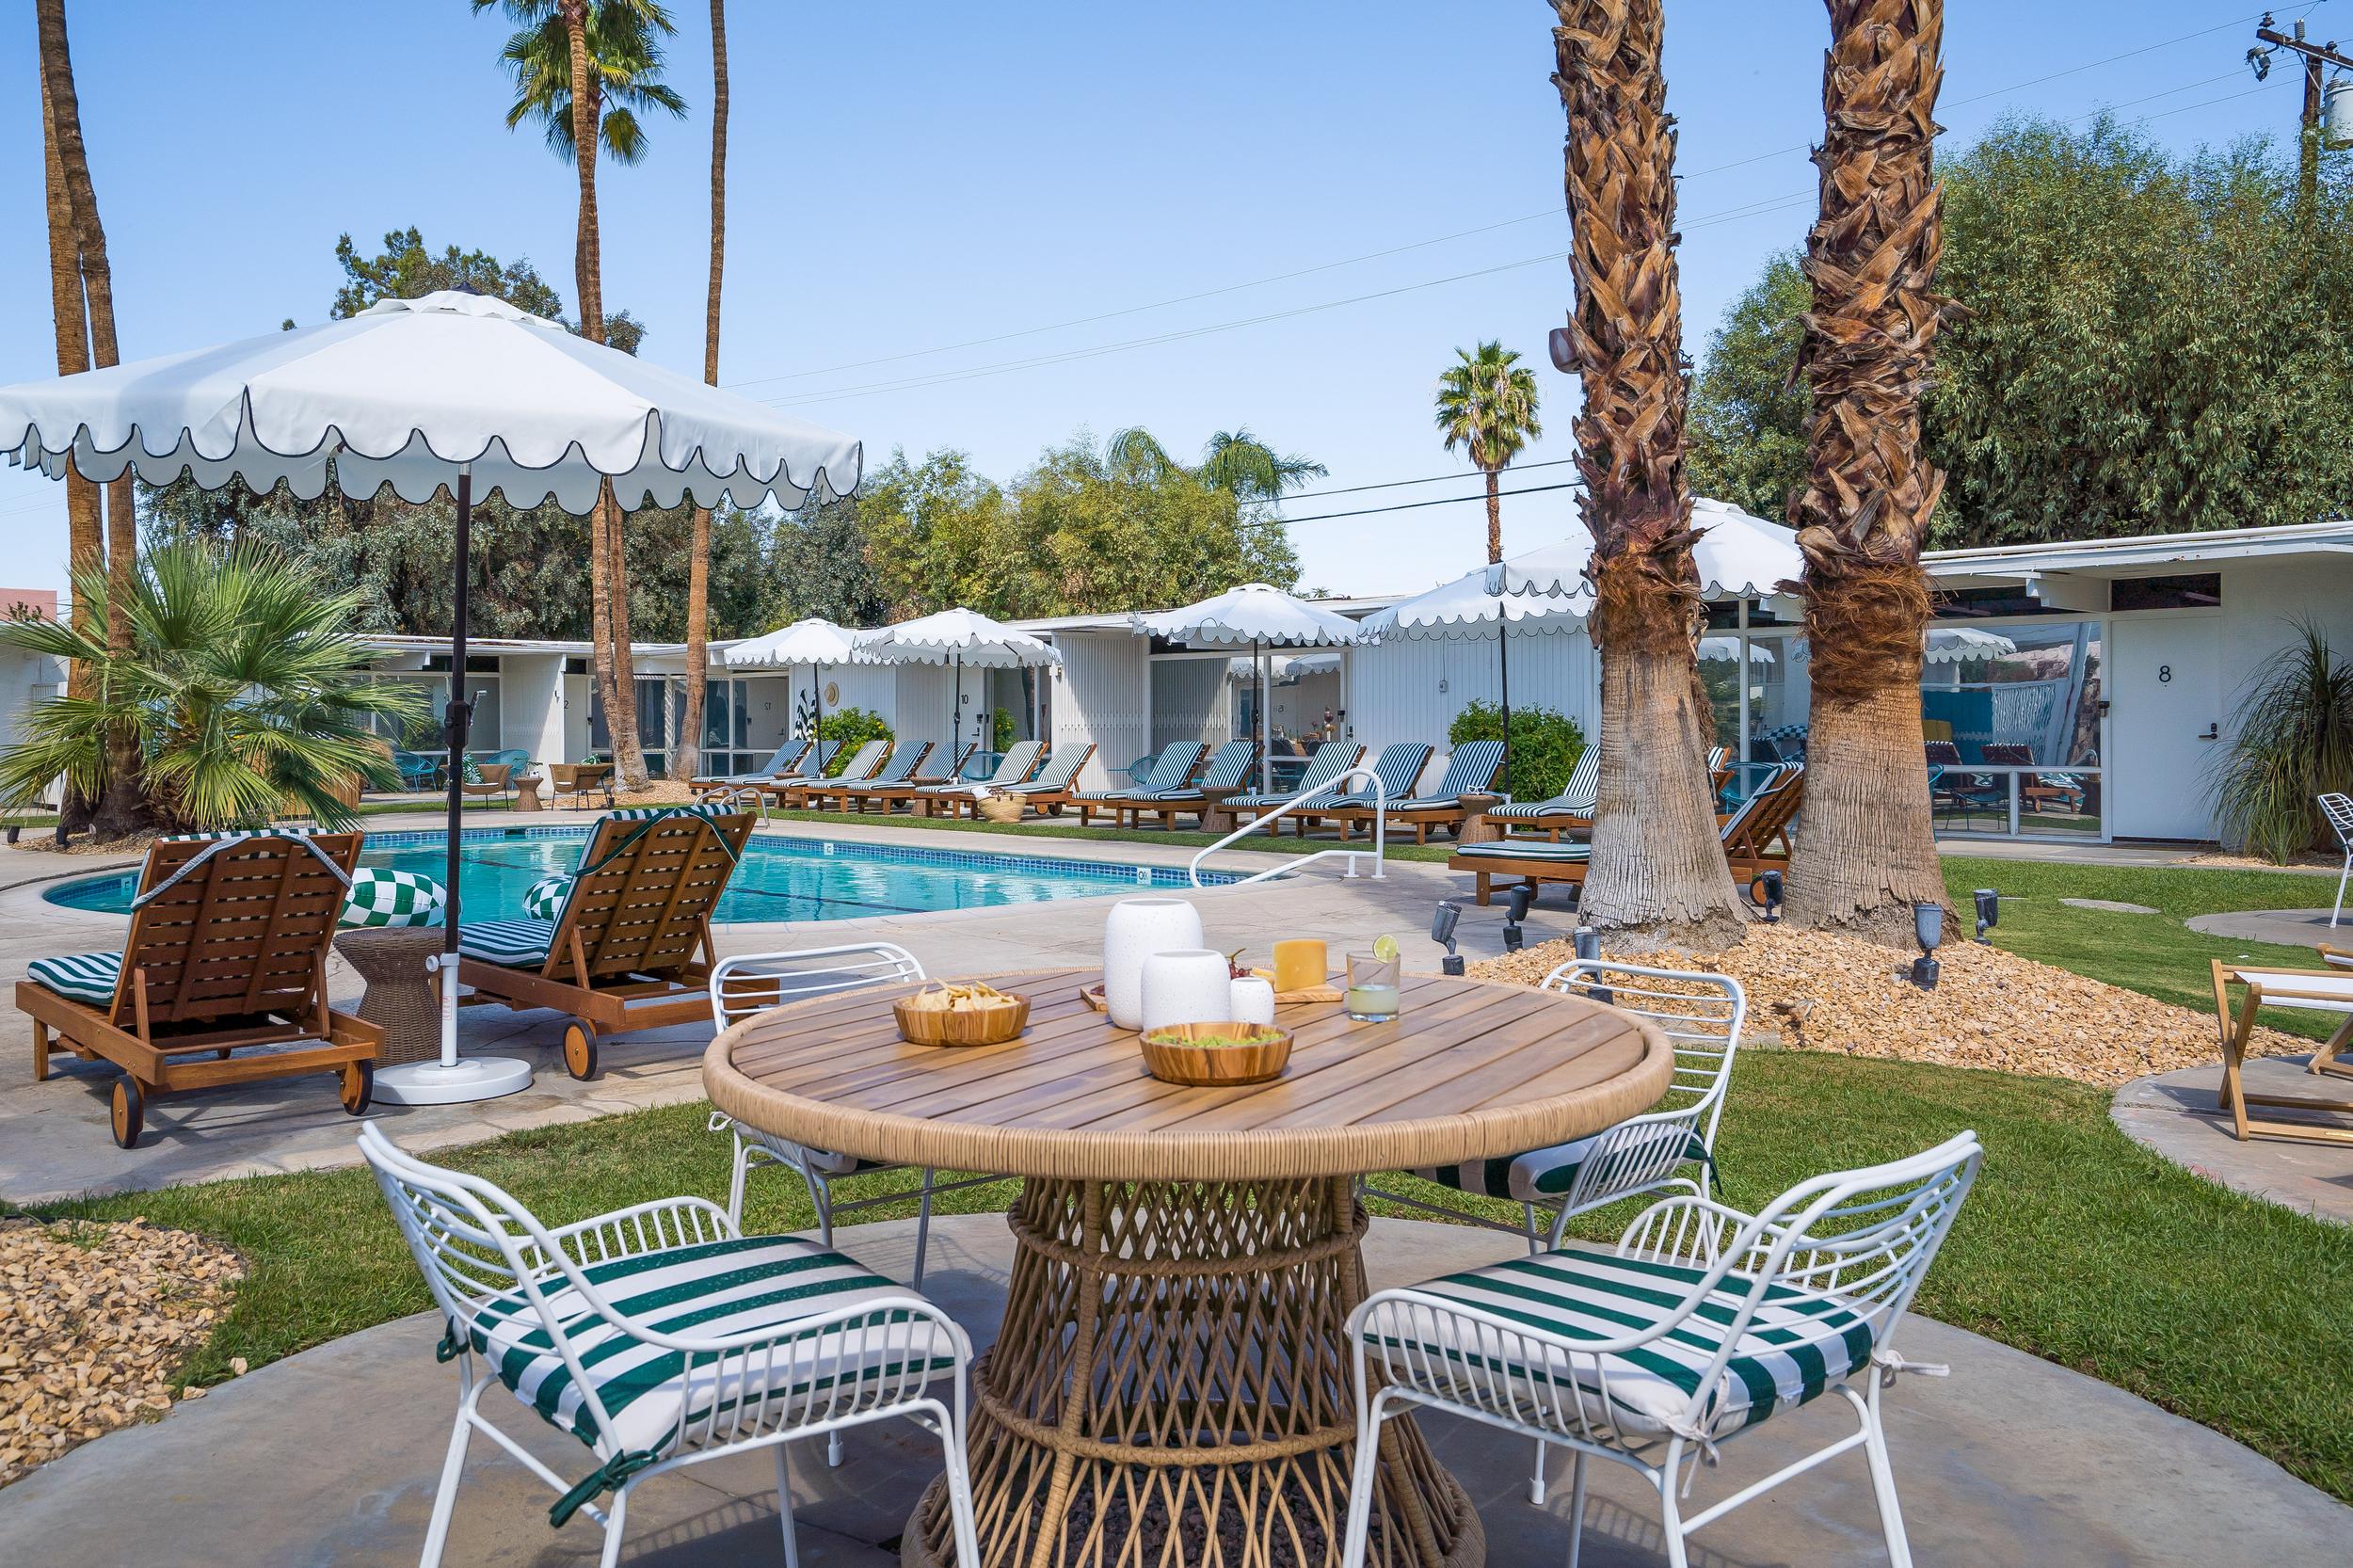 The relaxing pool at The Monkey Tree Hotel in Palm Springs, CA